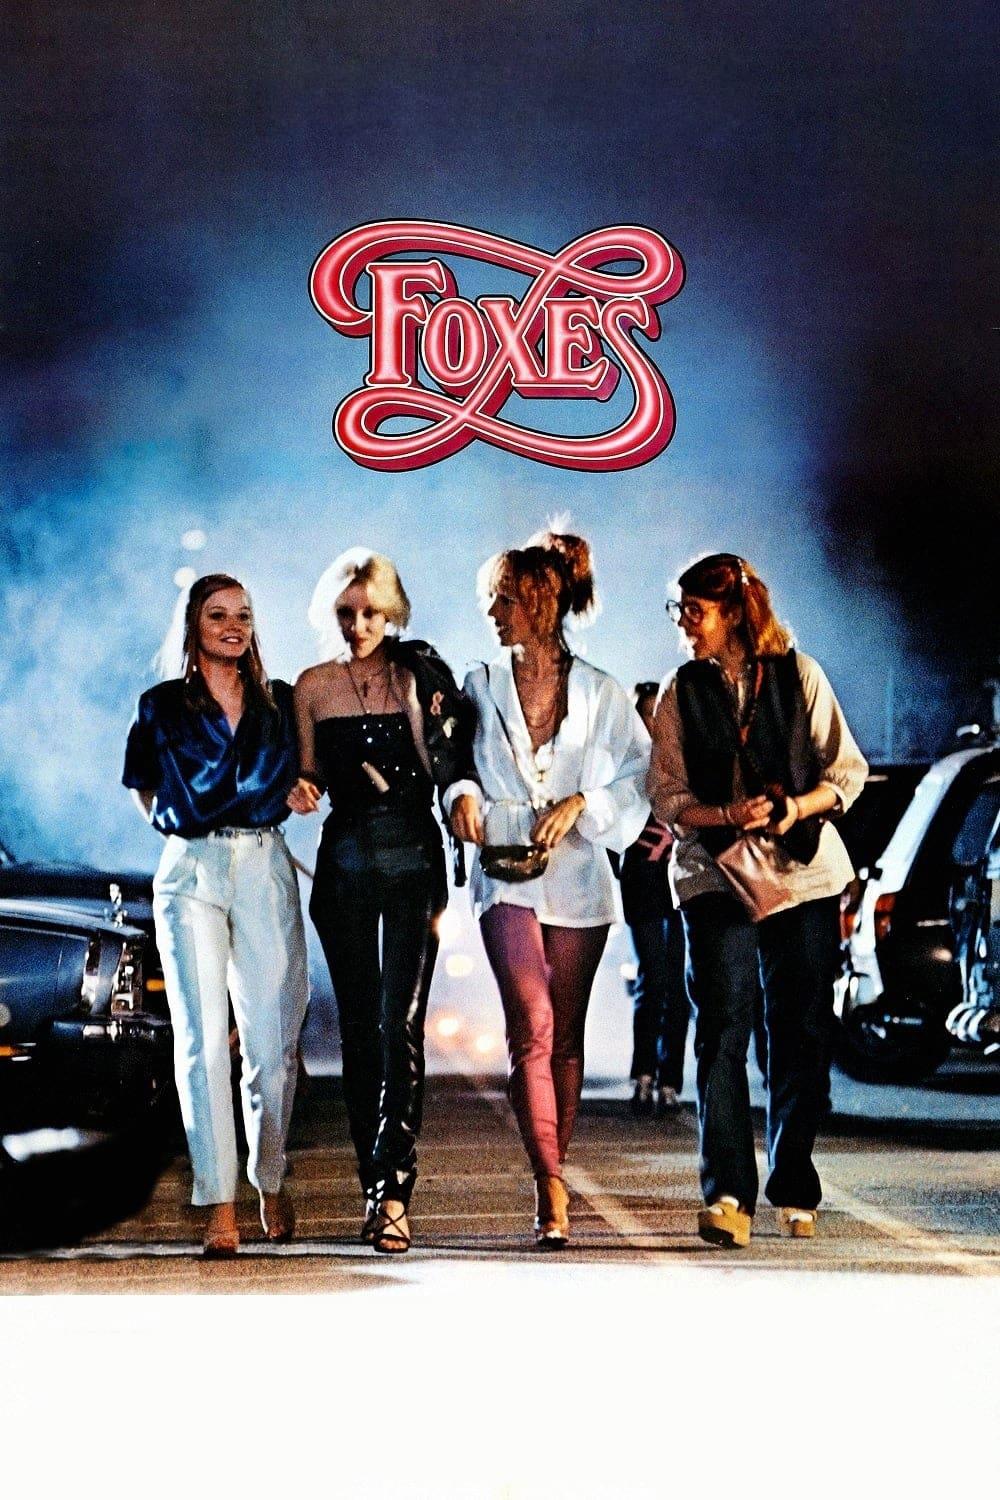 Foxes poster